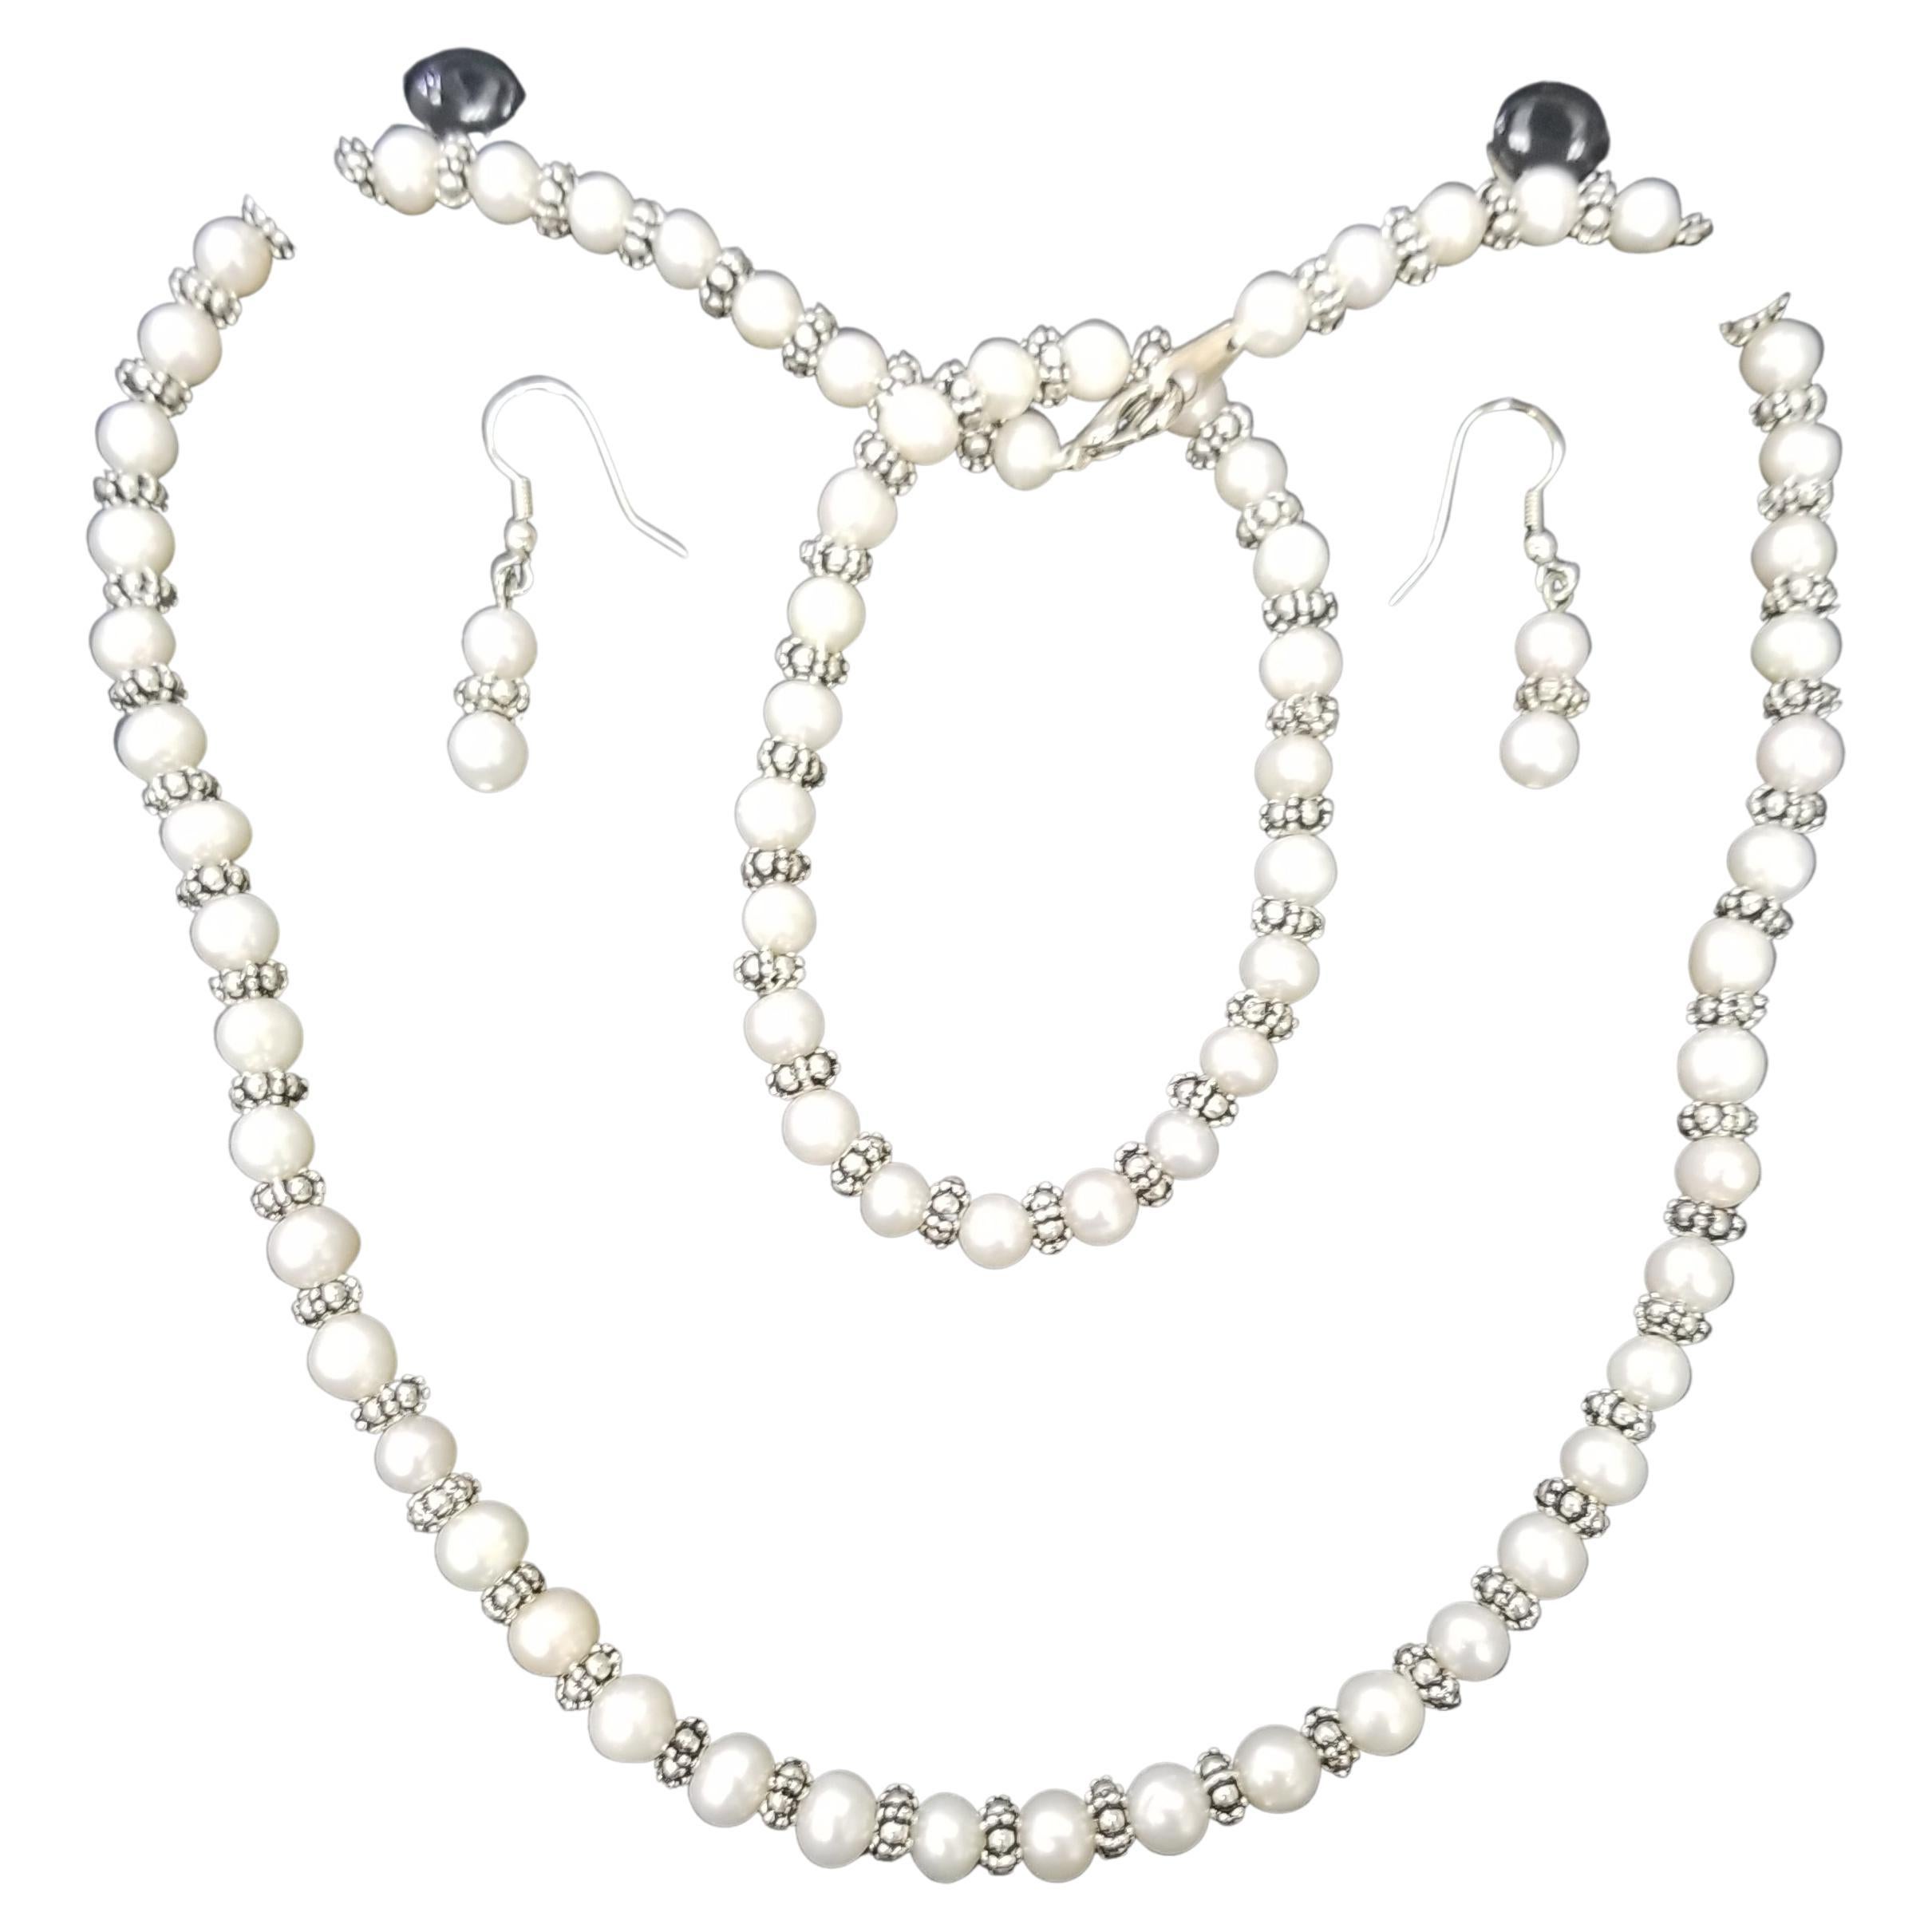 Set of Fresh Water Cultured Pearls Necklace, Bracelet and Earrings with Rondels For Sale